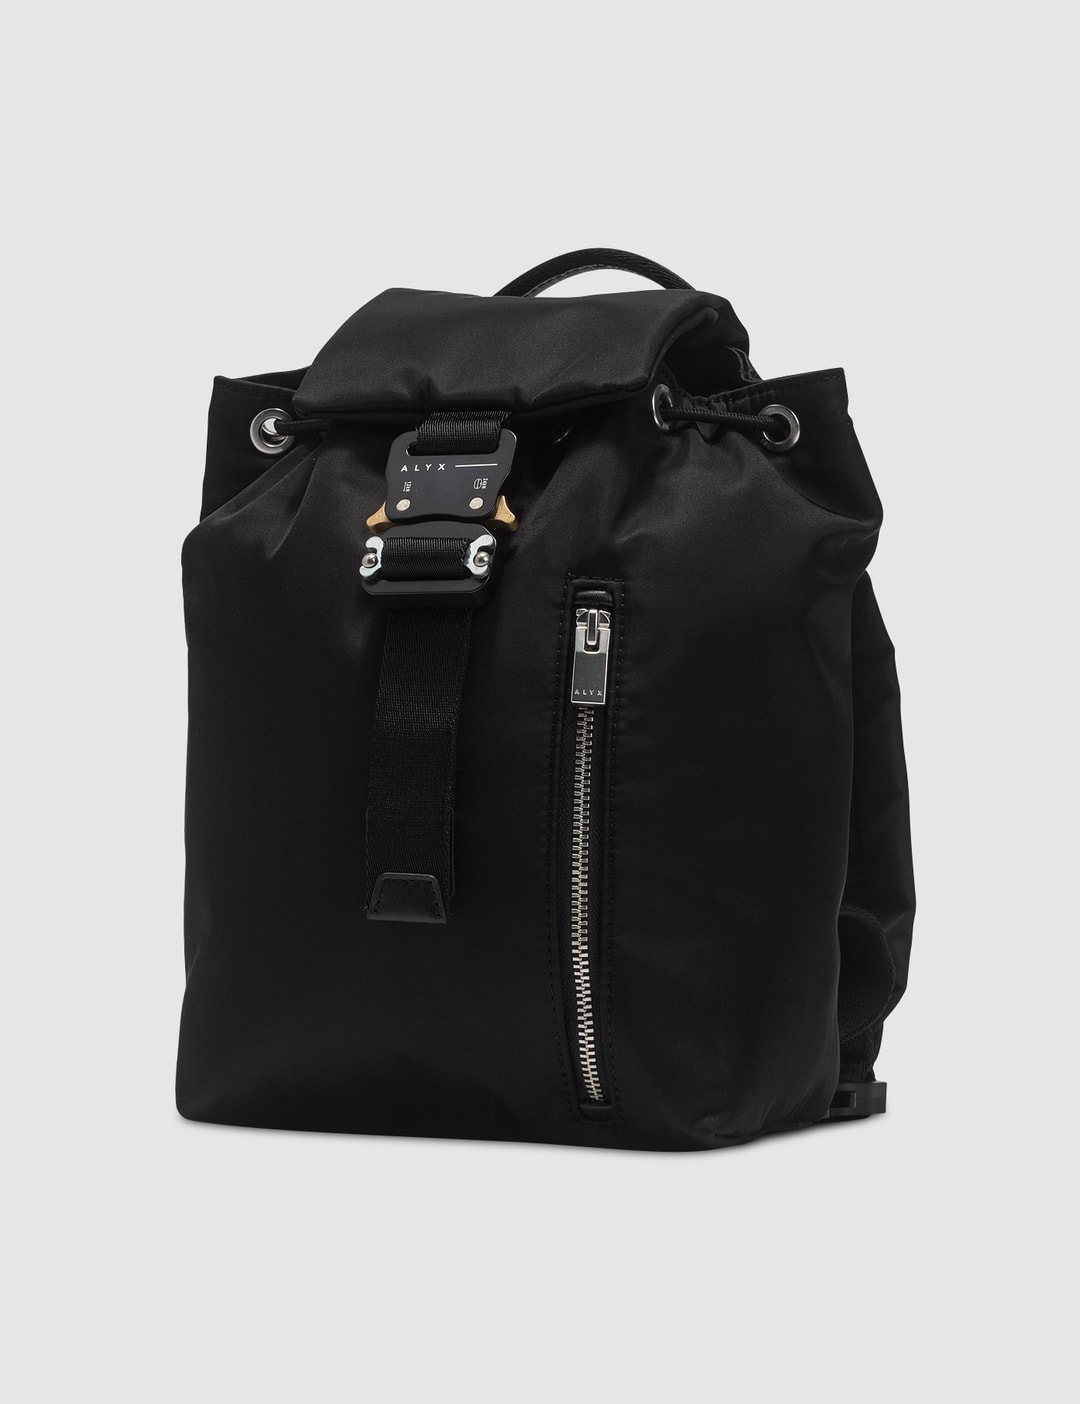 1017 ALYX 9SM - Baby-X Bag | HBX - Globally Curated Fashion and ...